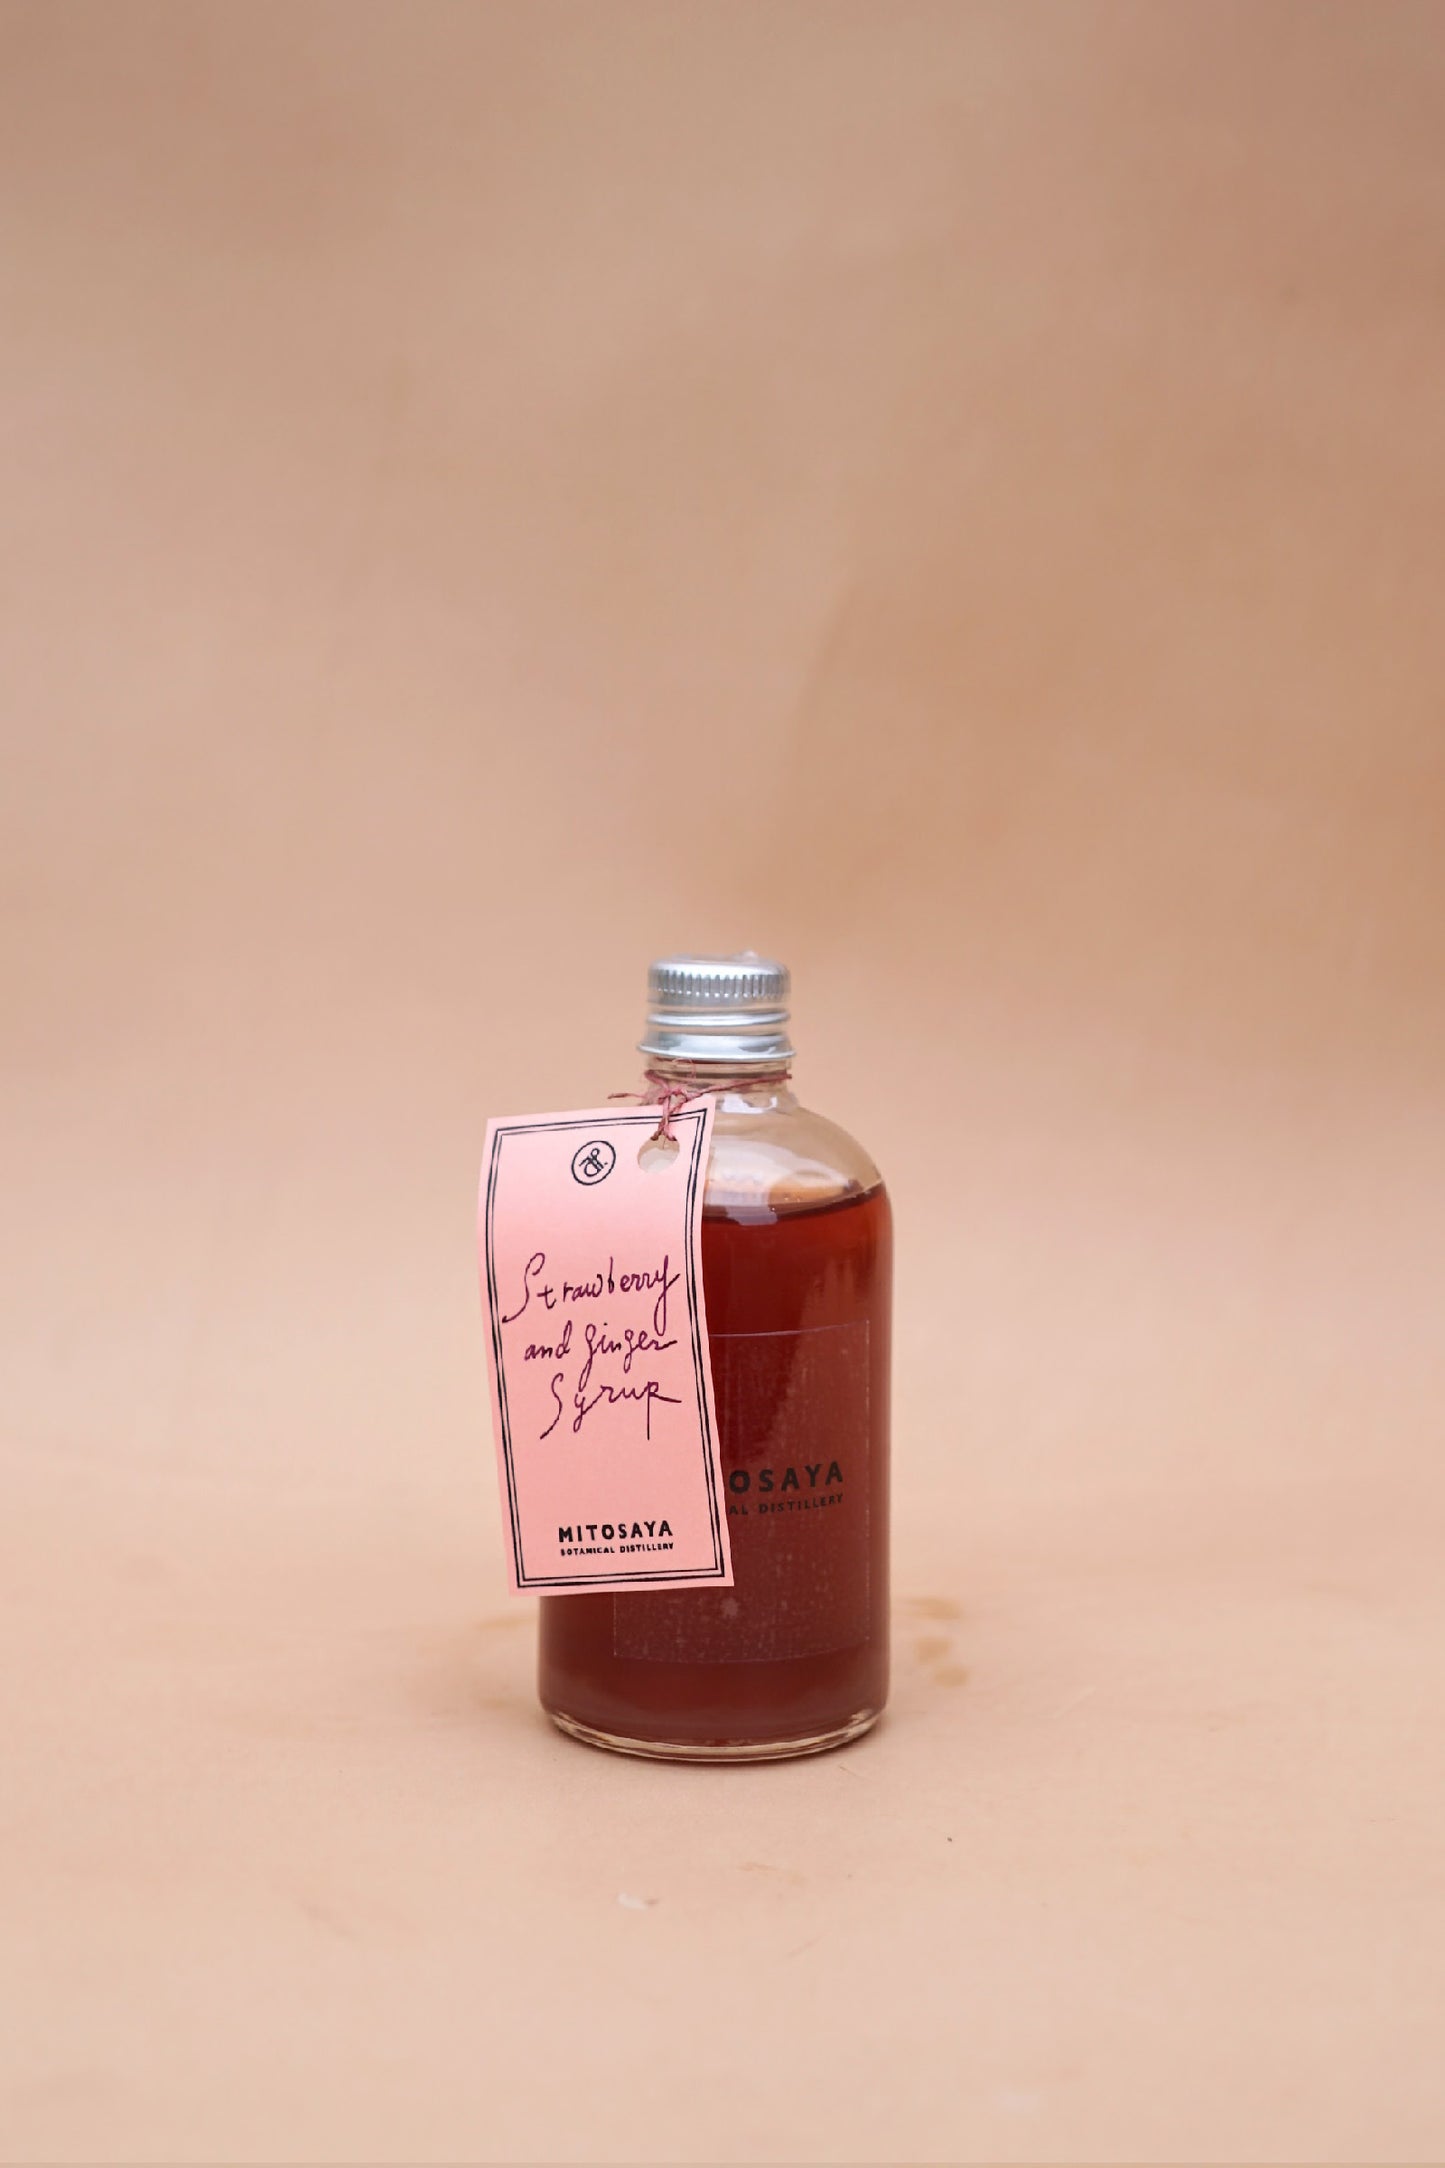 STRAWBERRY AND GINGER SYRUP / 苺と生姜のシロップ